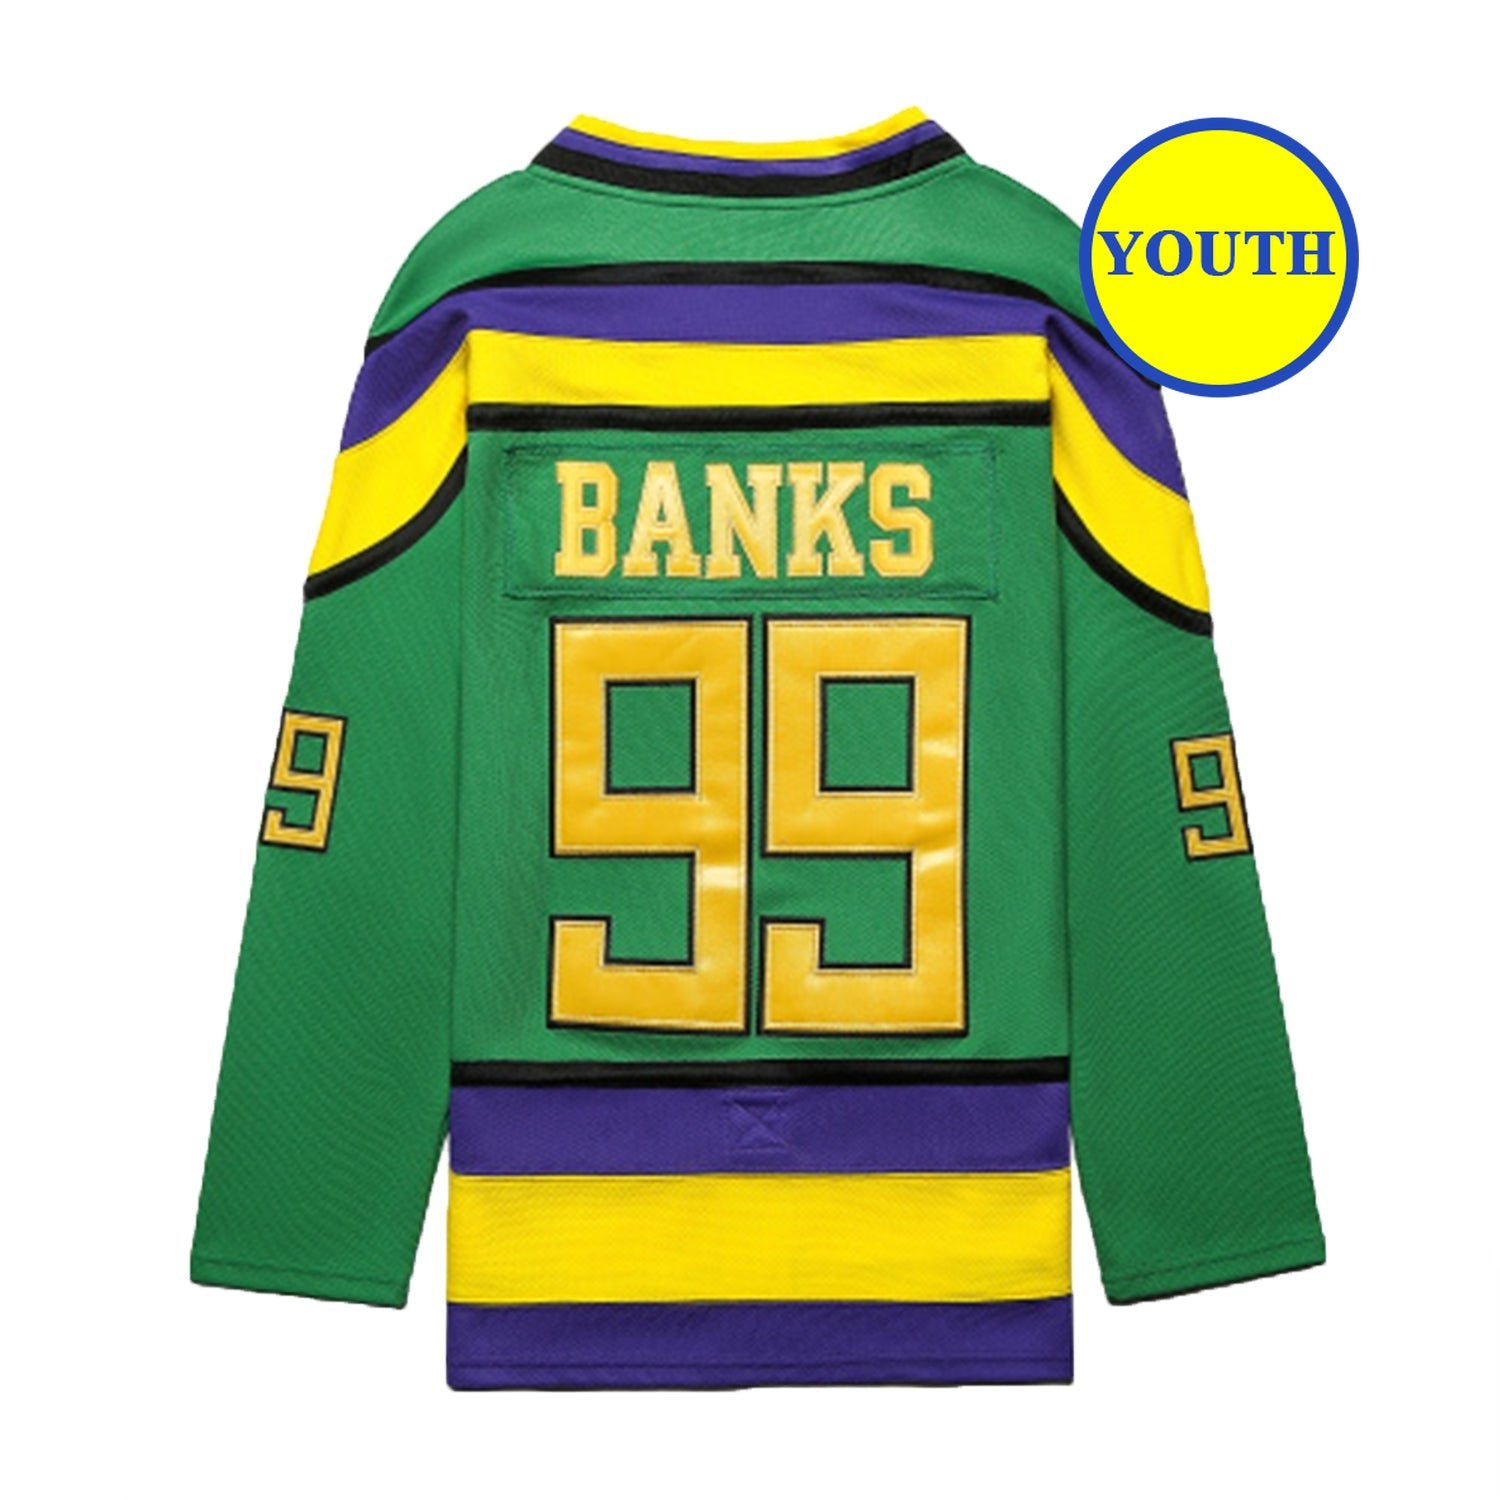 99 Adam Banks - one of my first Hockey loves 😍